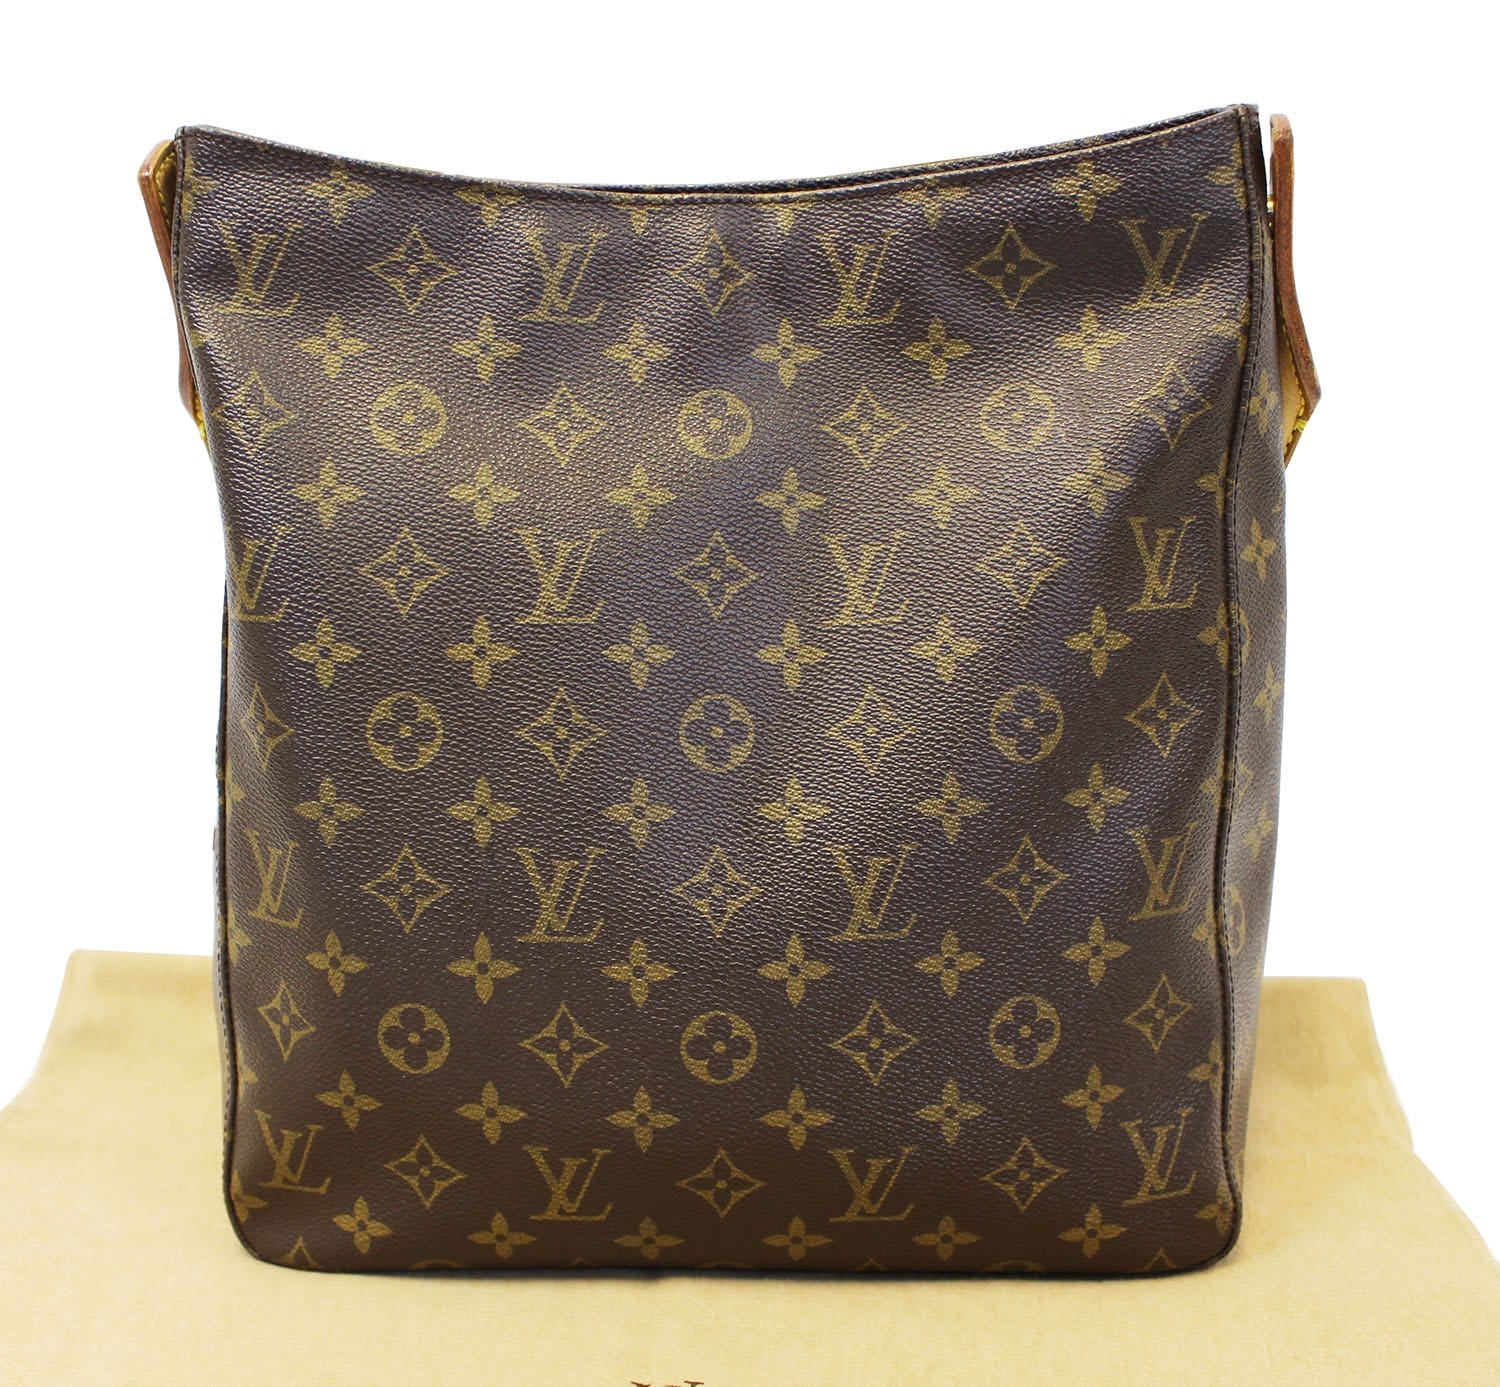 Louis Vuitton - Looping, Authentic Used Bags & Handbags